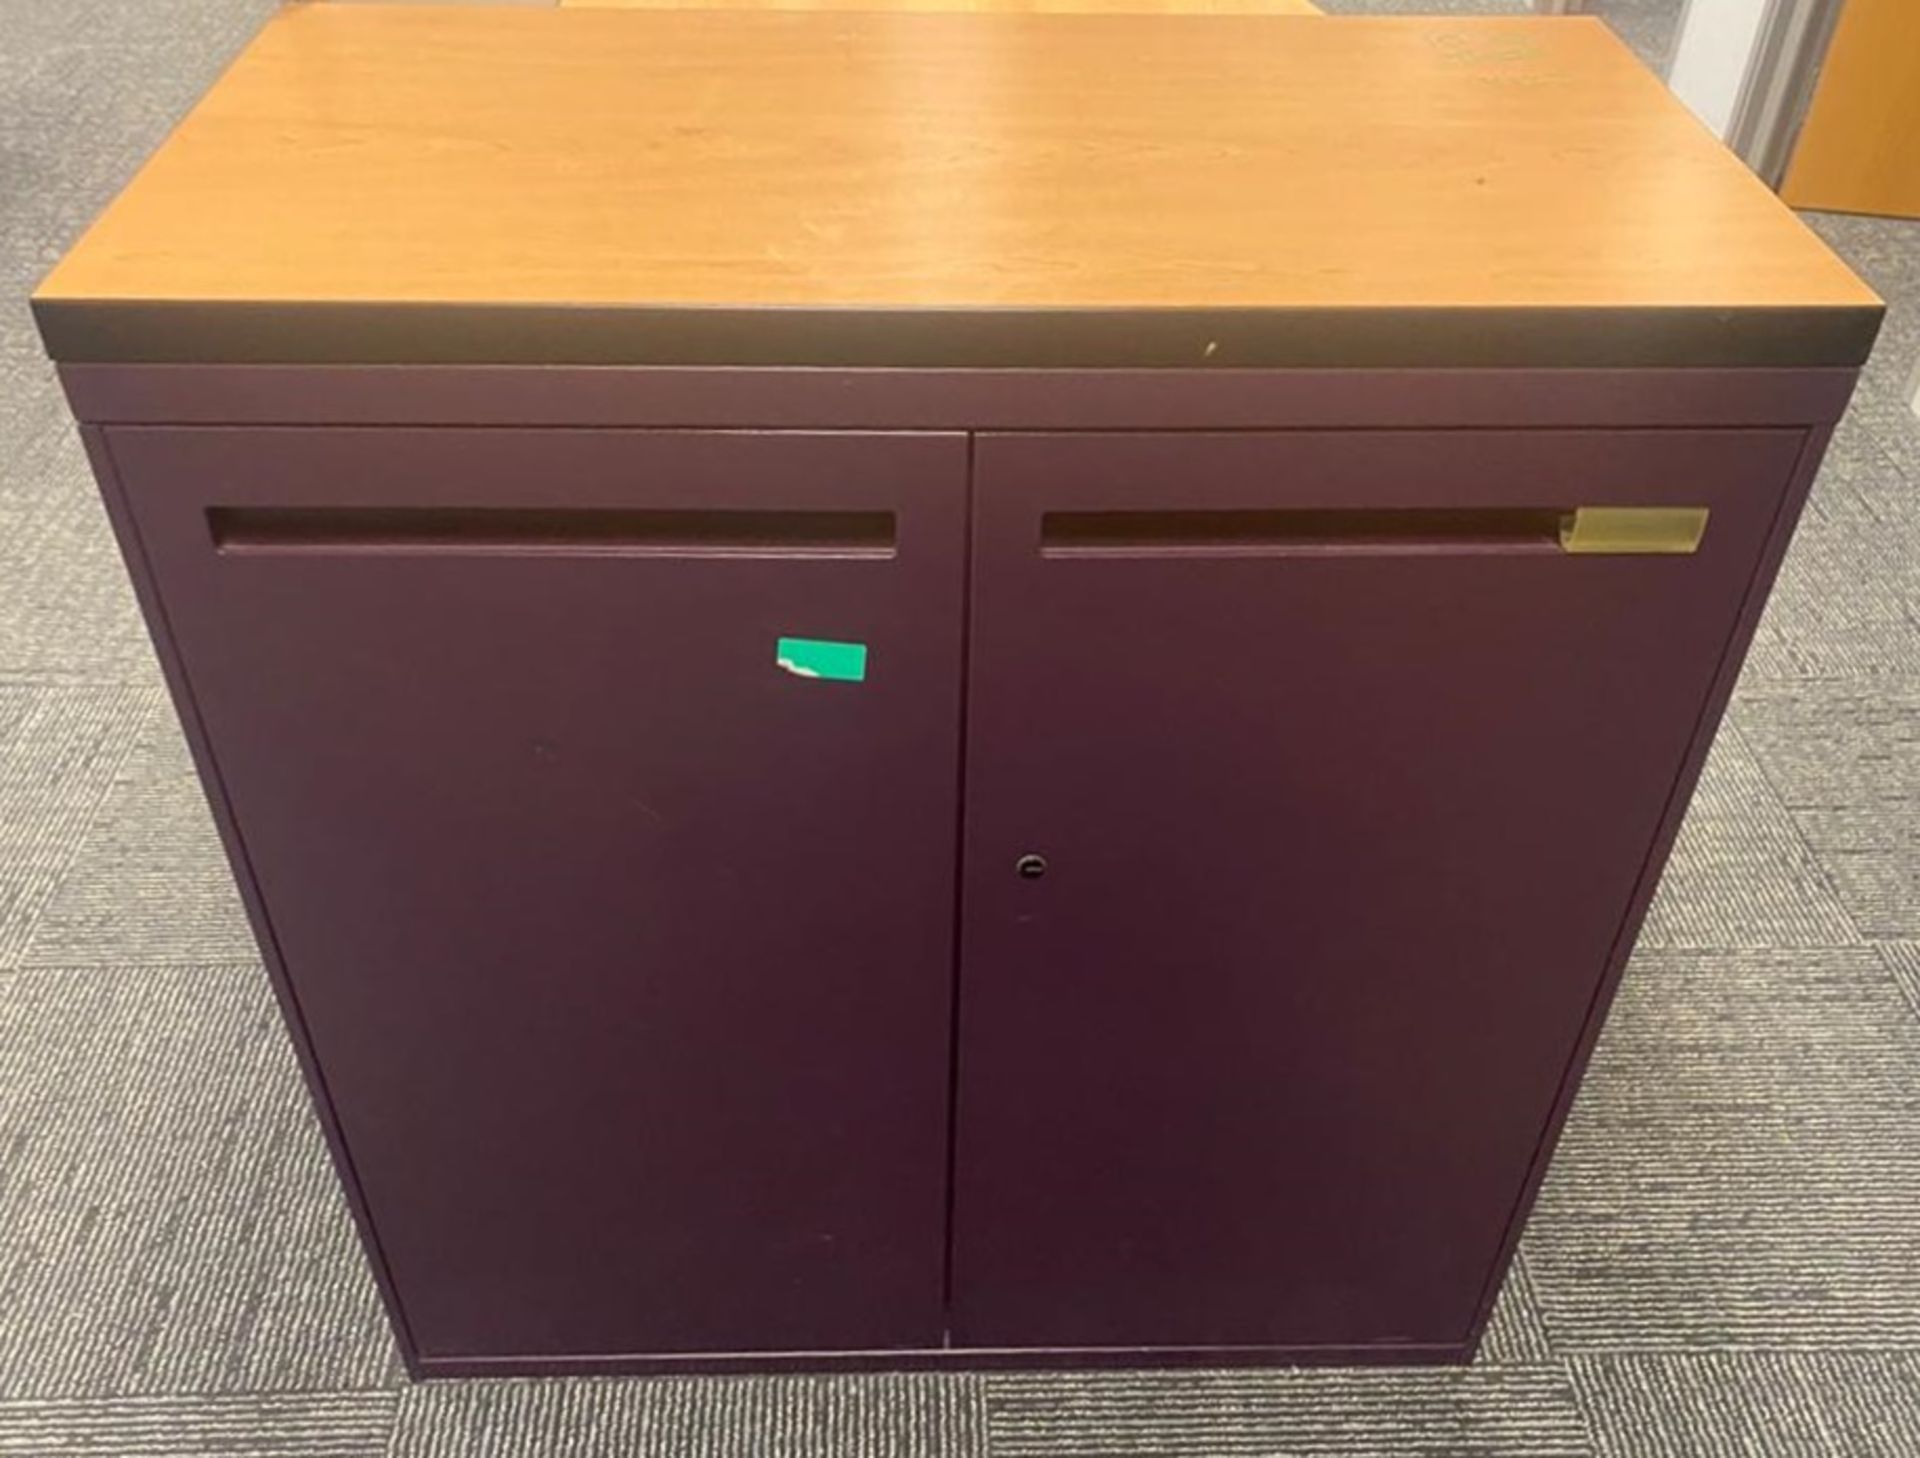 1 x Office Storage Cabinet For Files/Stationary - Features a Contemporary Purple Finish - Image 3 of 3